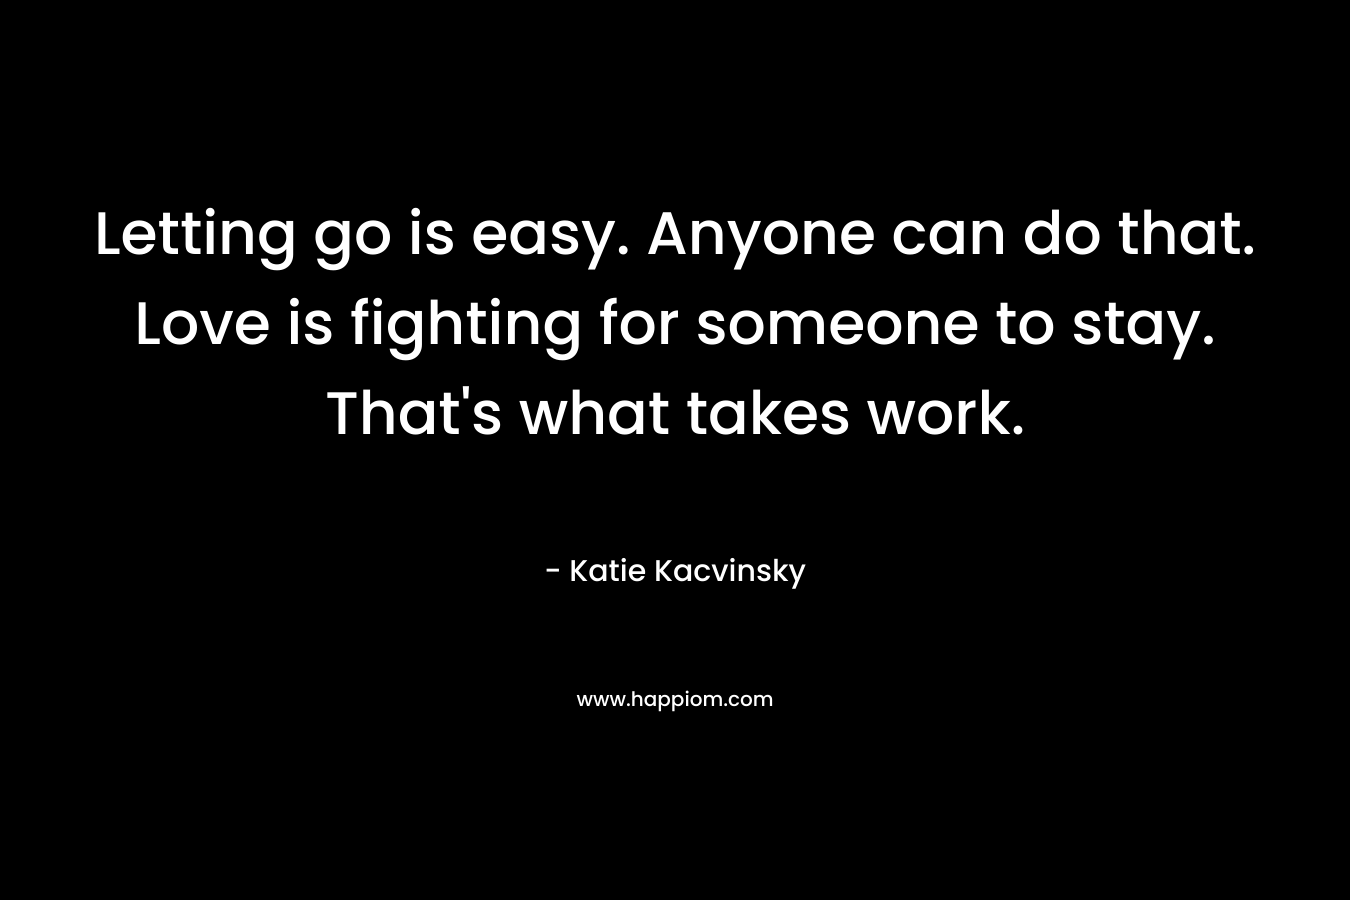 Letting go is easy. Anyone can do that. Love is fighting for someone to stay. That’s what takes work. – Katie Kacvinsky